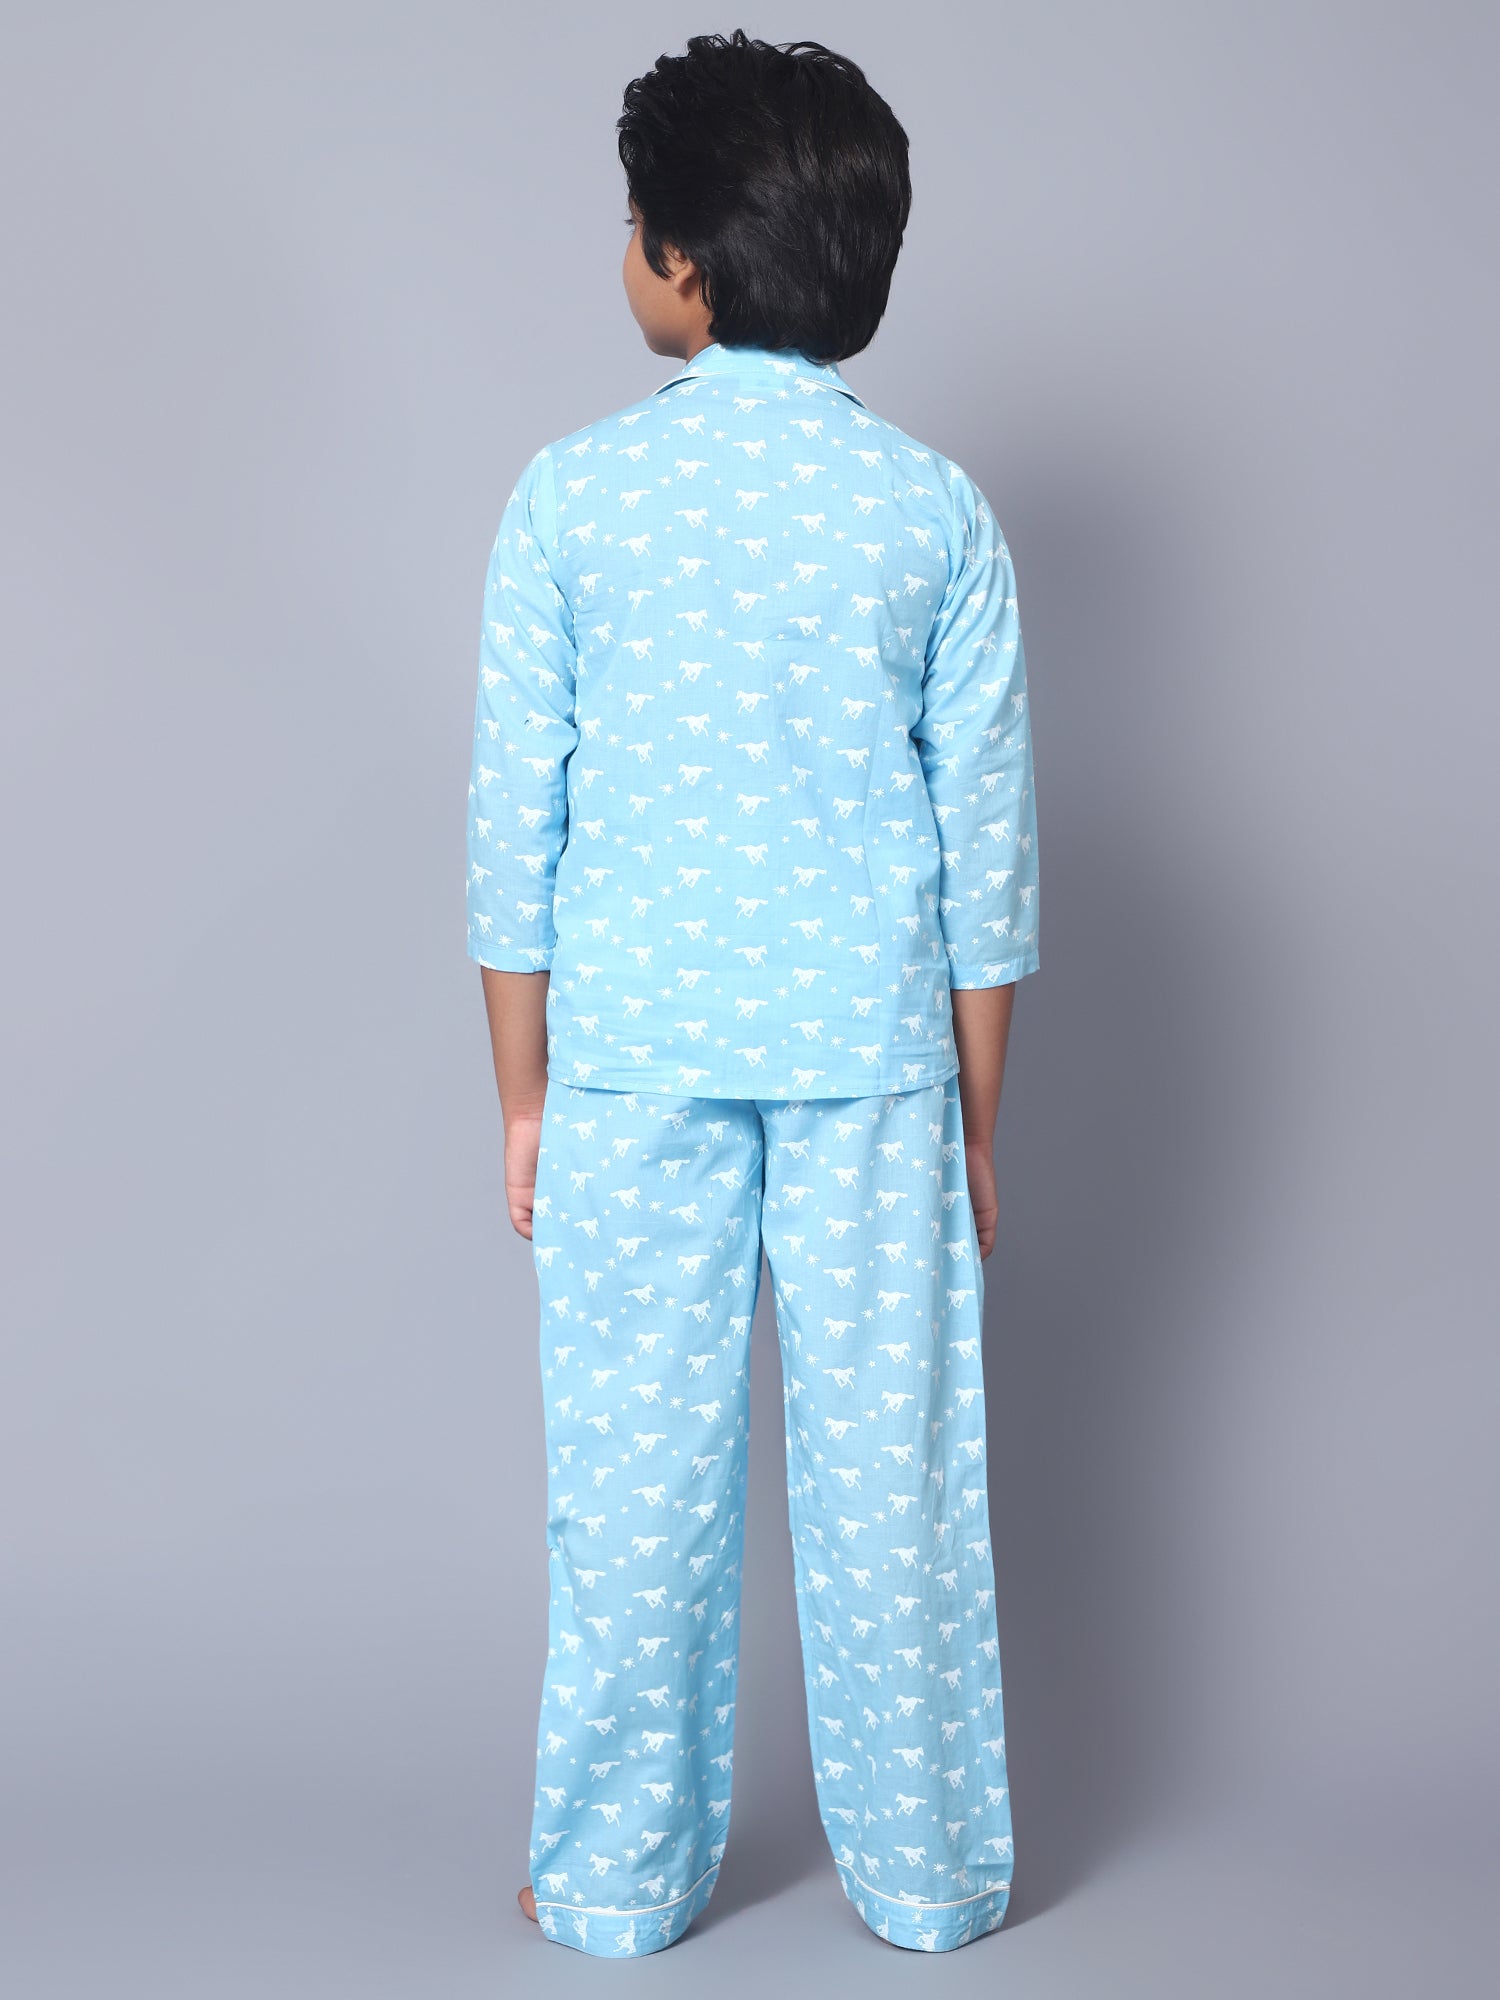 Cotton Blue Horses Kid Night Suit For Boys & Girls